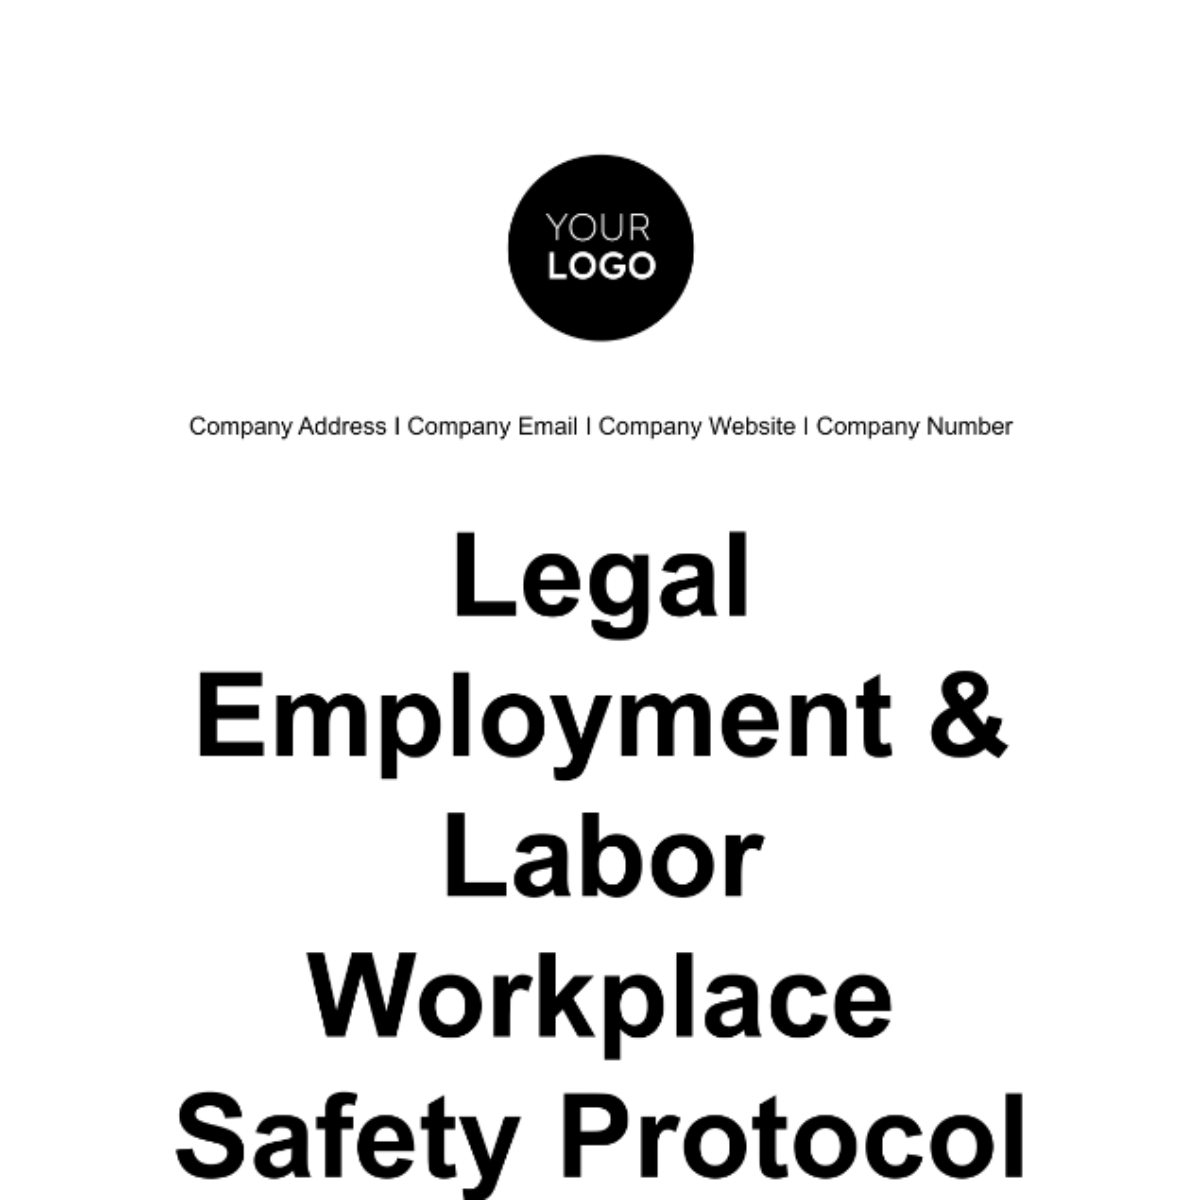 Legal Employment & Labor Workplace Safety Protocol Template